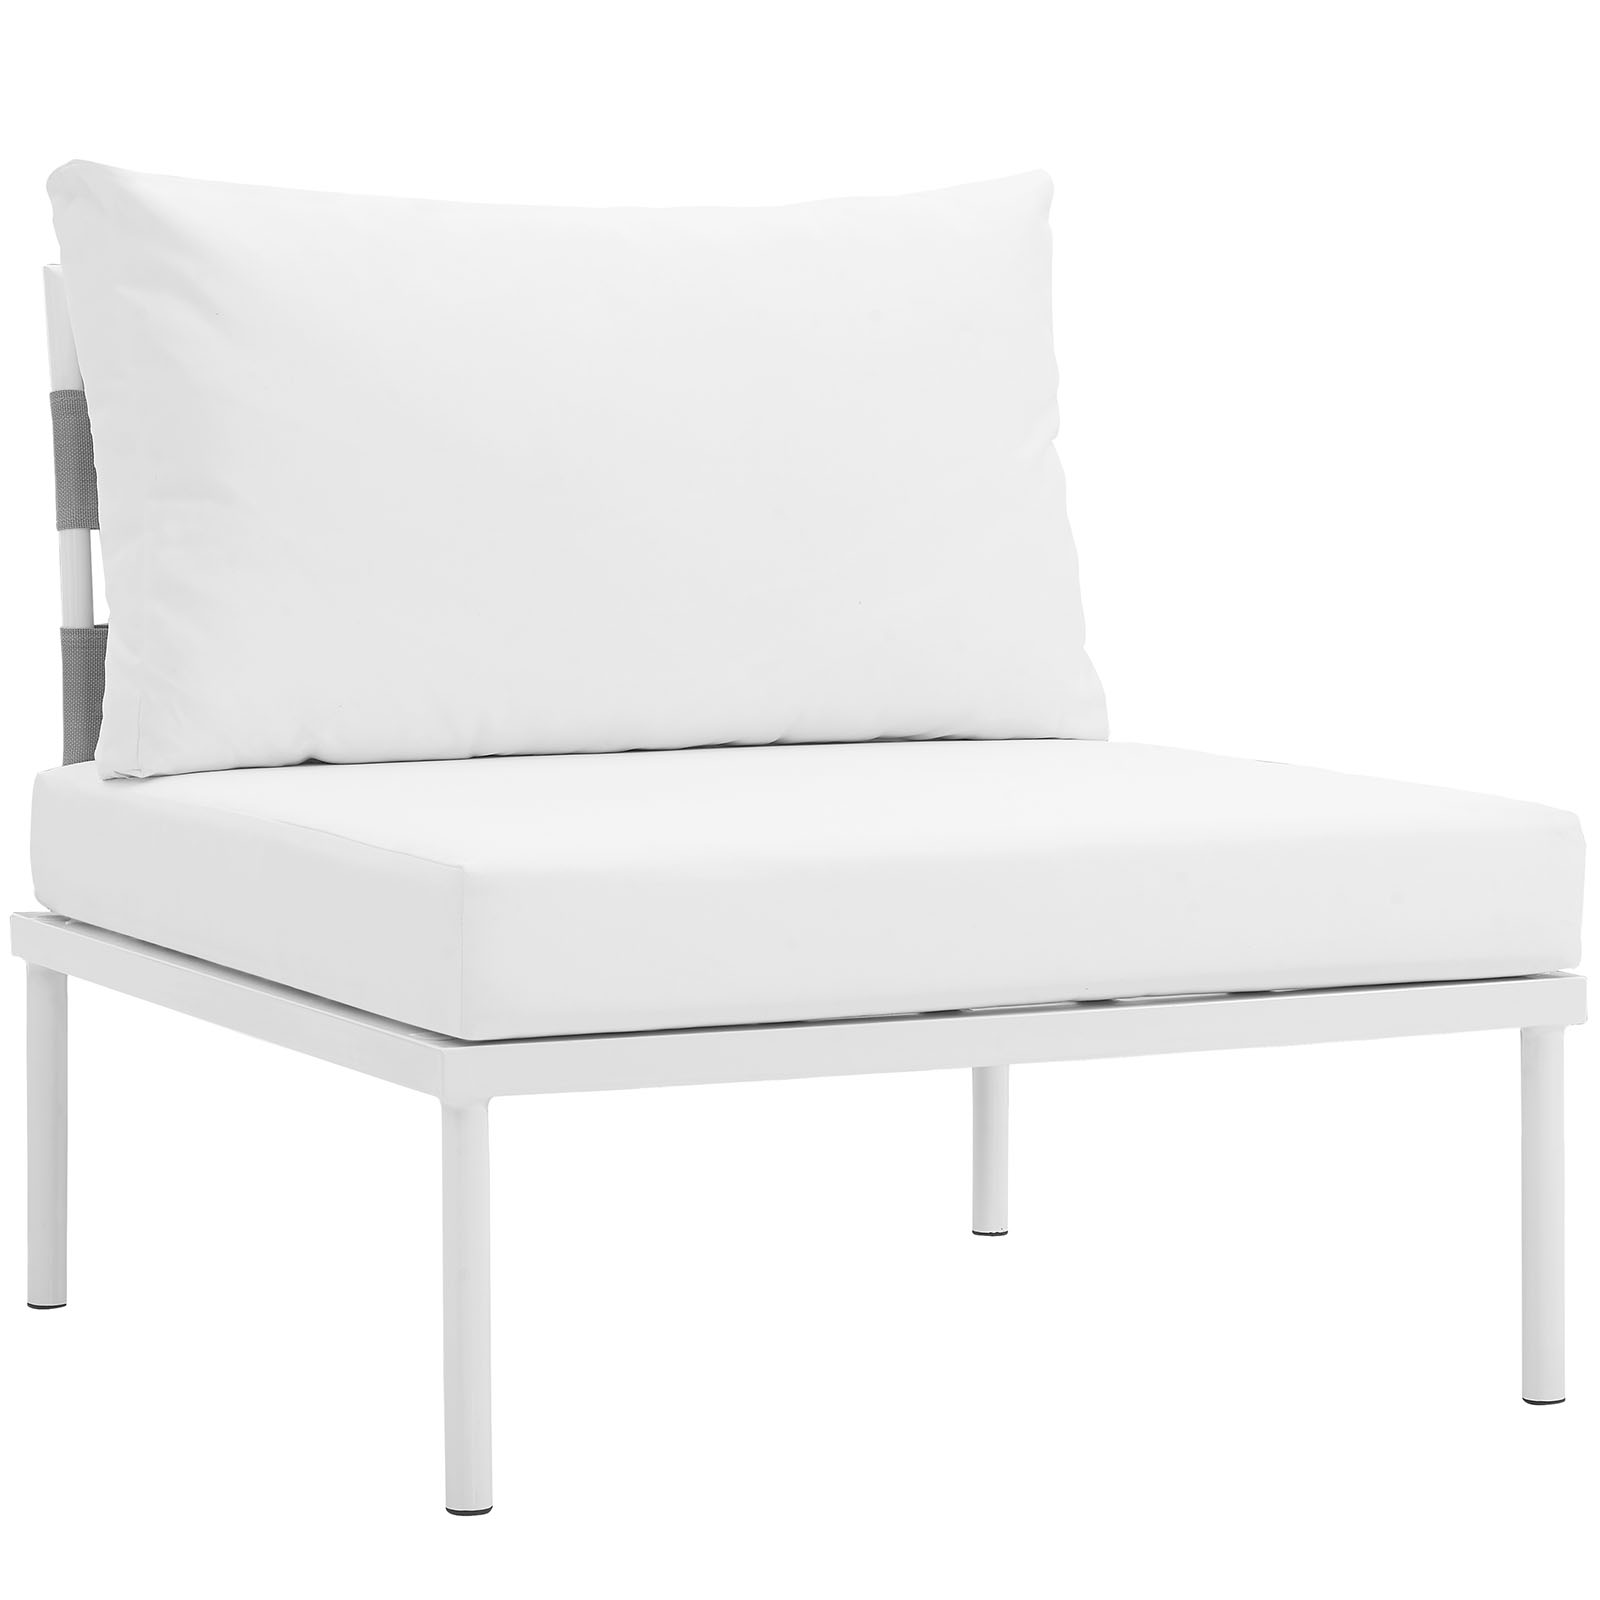 Modern Contemporary Urban Design Outdoor Patio Balcony Lounge Chair, White, Rattan - image 1 of 5